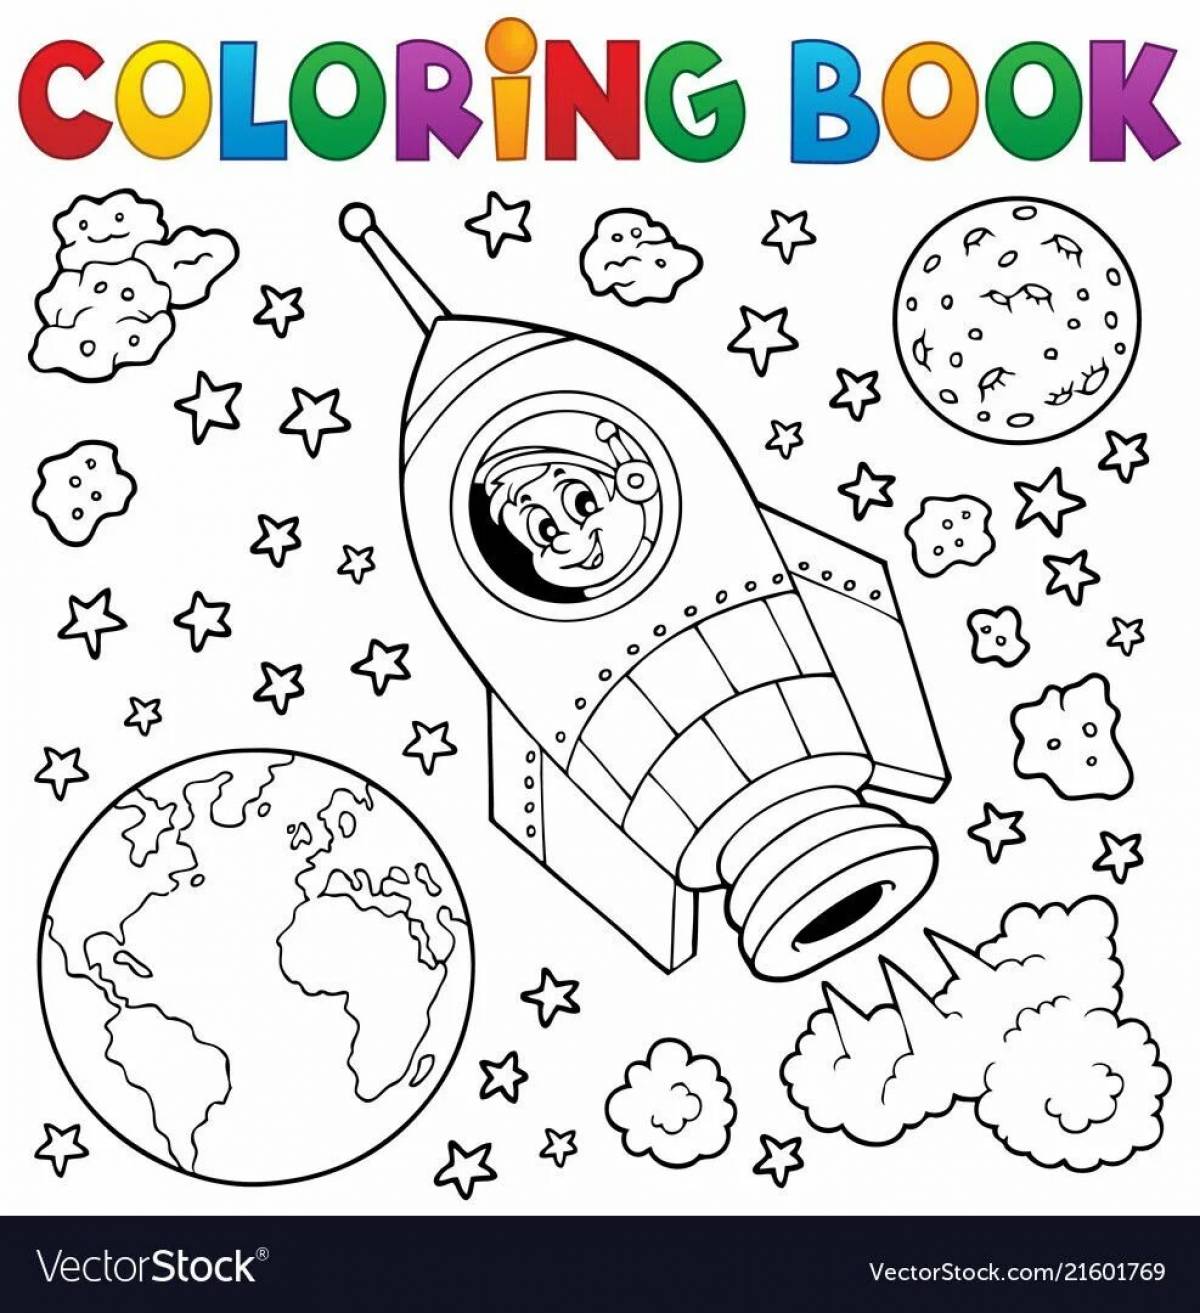 Amazing space 1st grade coloring book